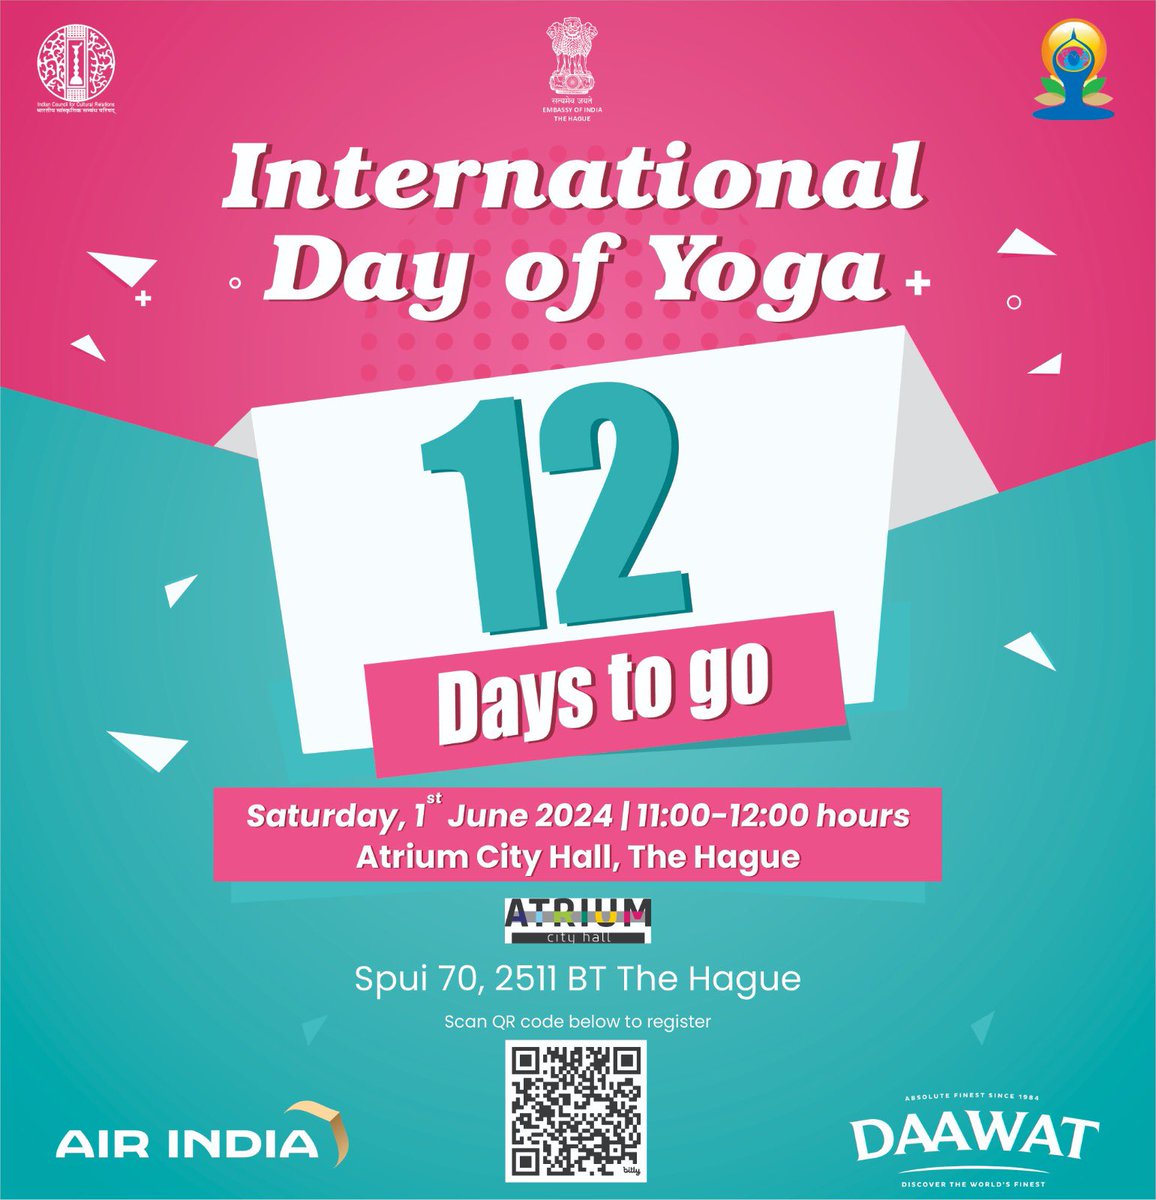 Join us for the International Day of Yoga event on Saturday, 1st June/ 1100 - 1200 hrs @AtriumCityHall We encourage to carry your own yoga mat. #InternationalDayofYoga Register @ bit.ly/4b7fWIY or scan QR code👇